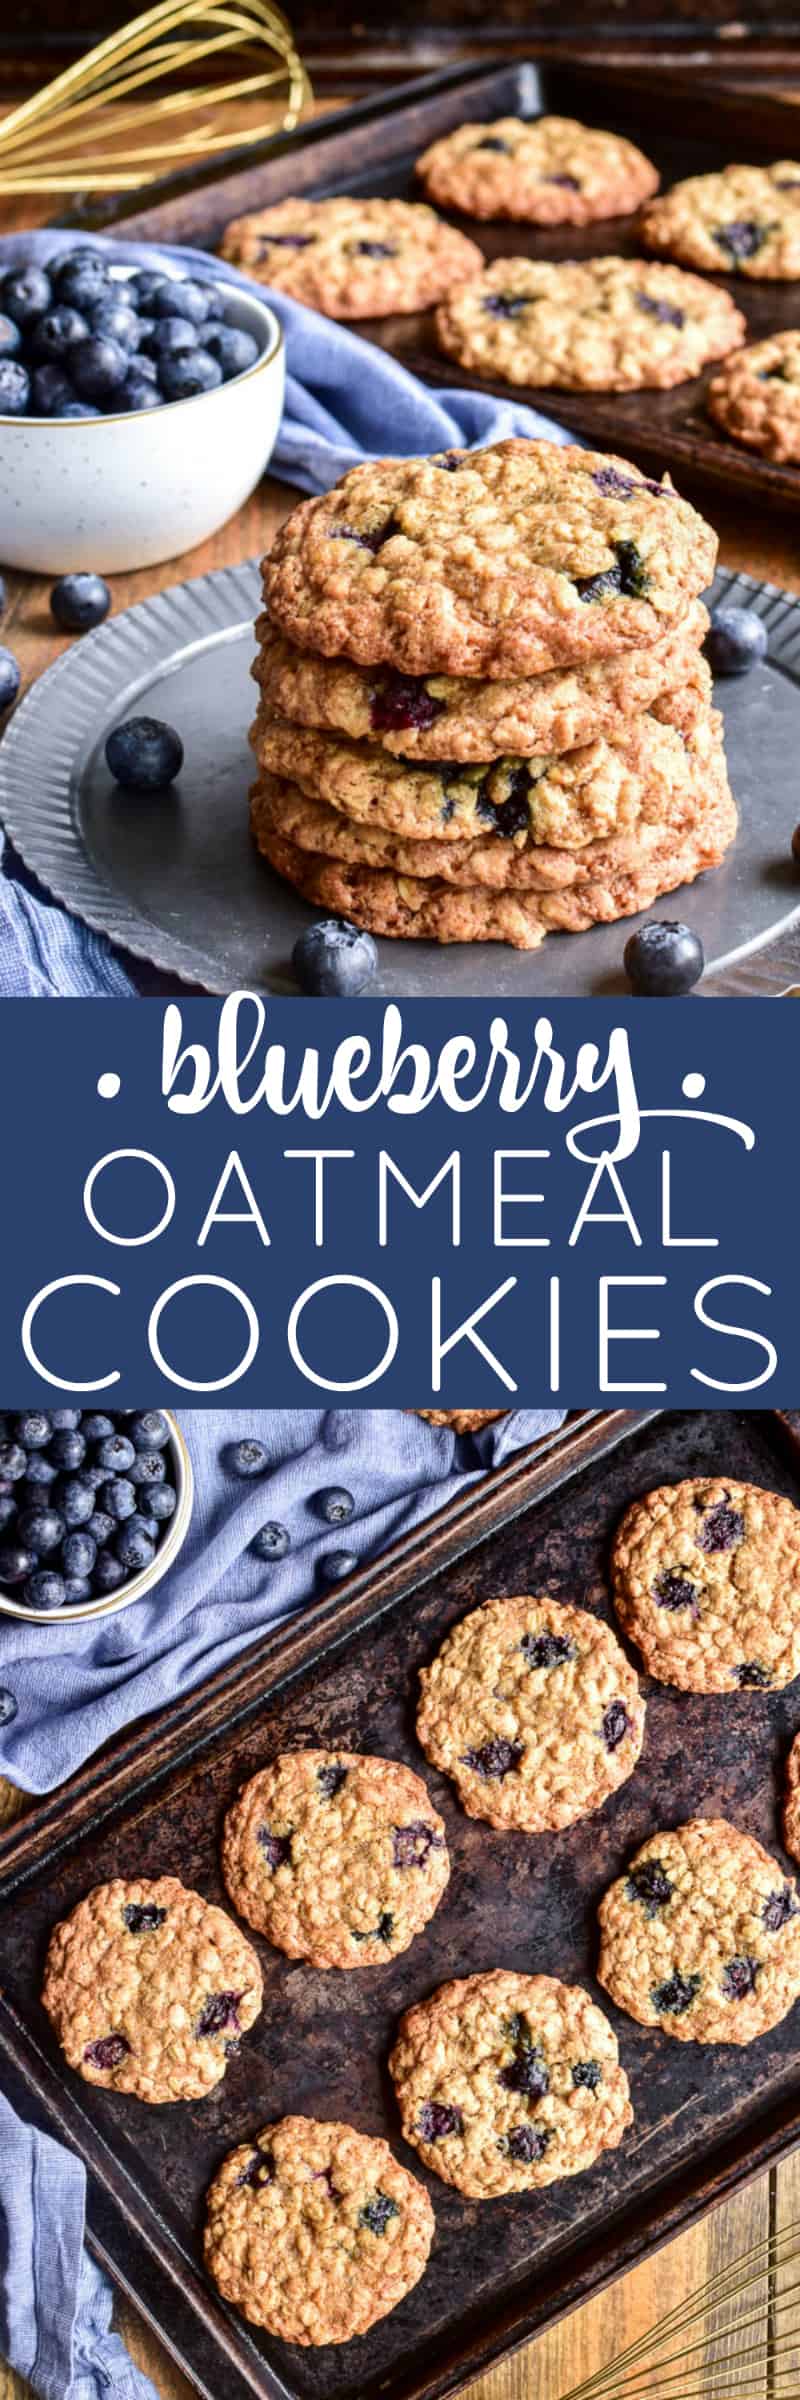 Collage image of Blueberry Oatmeal Cookies